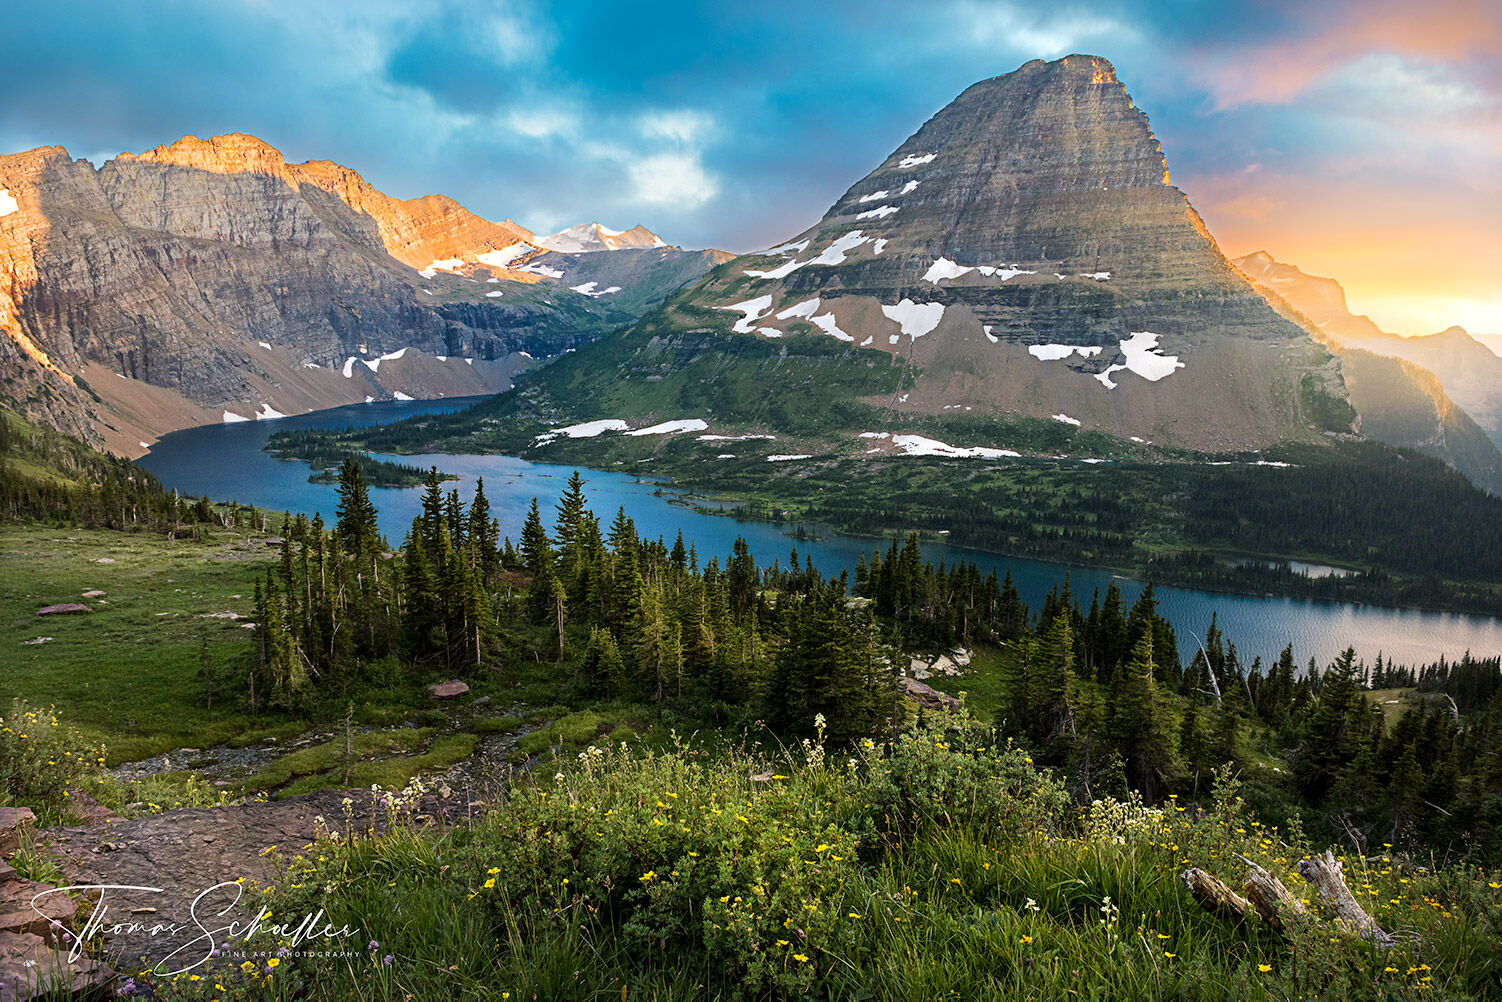 Viewed from Logan pass, Bearhat Mountain soars over Hidden lake as late-day summer storms depart, allowing dramatic sunset light to illuminate the highest peaks